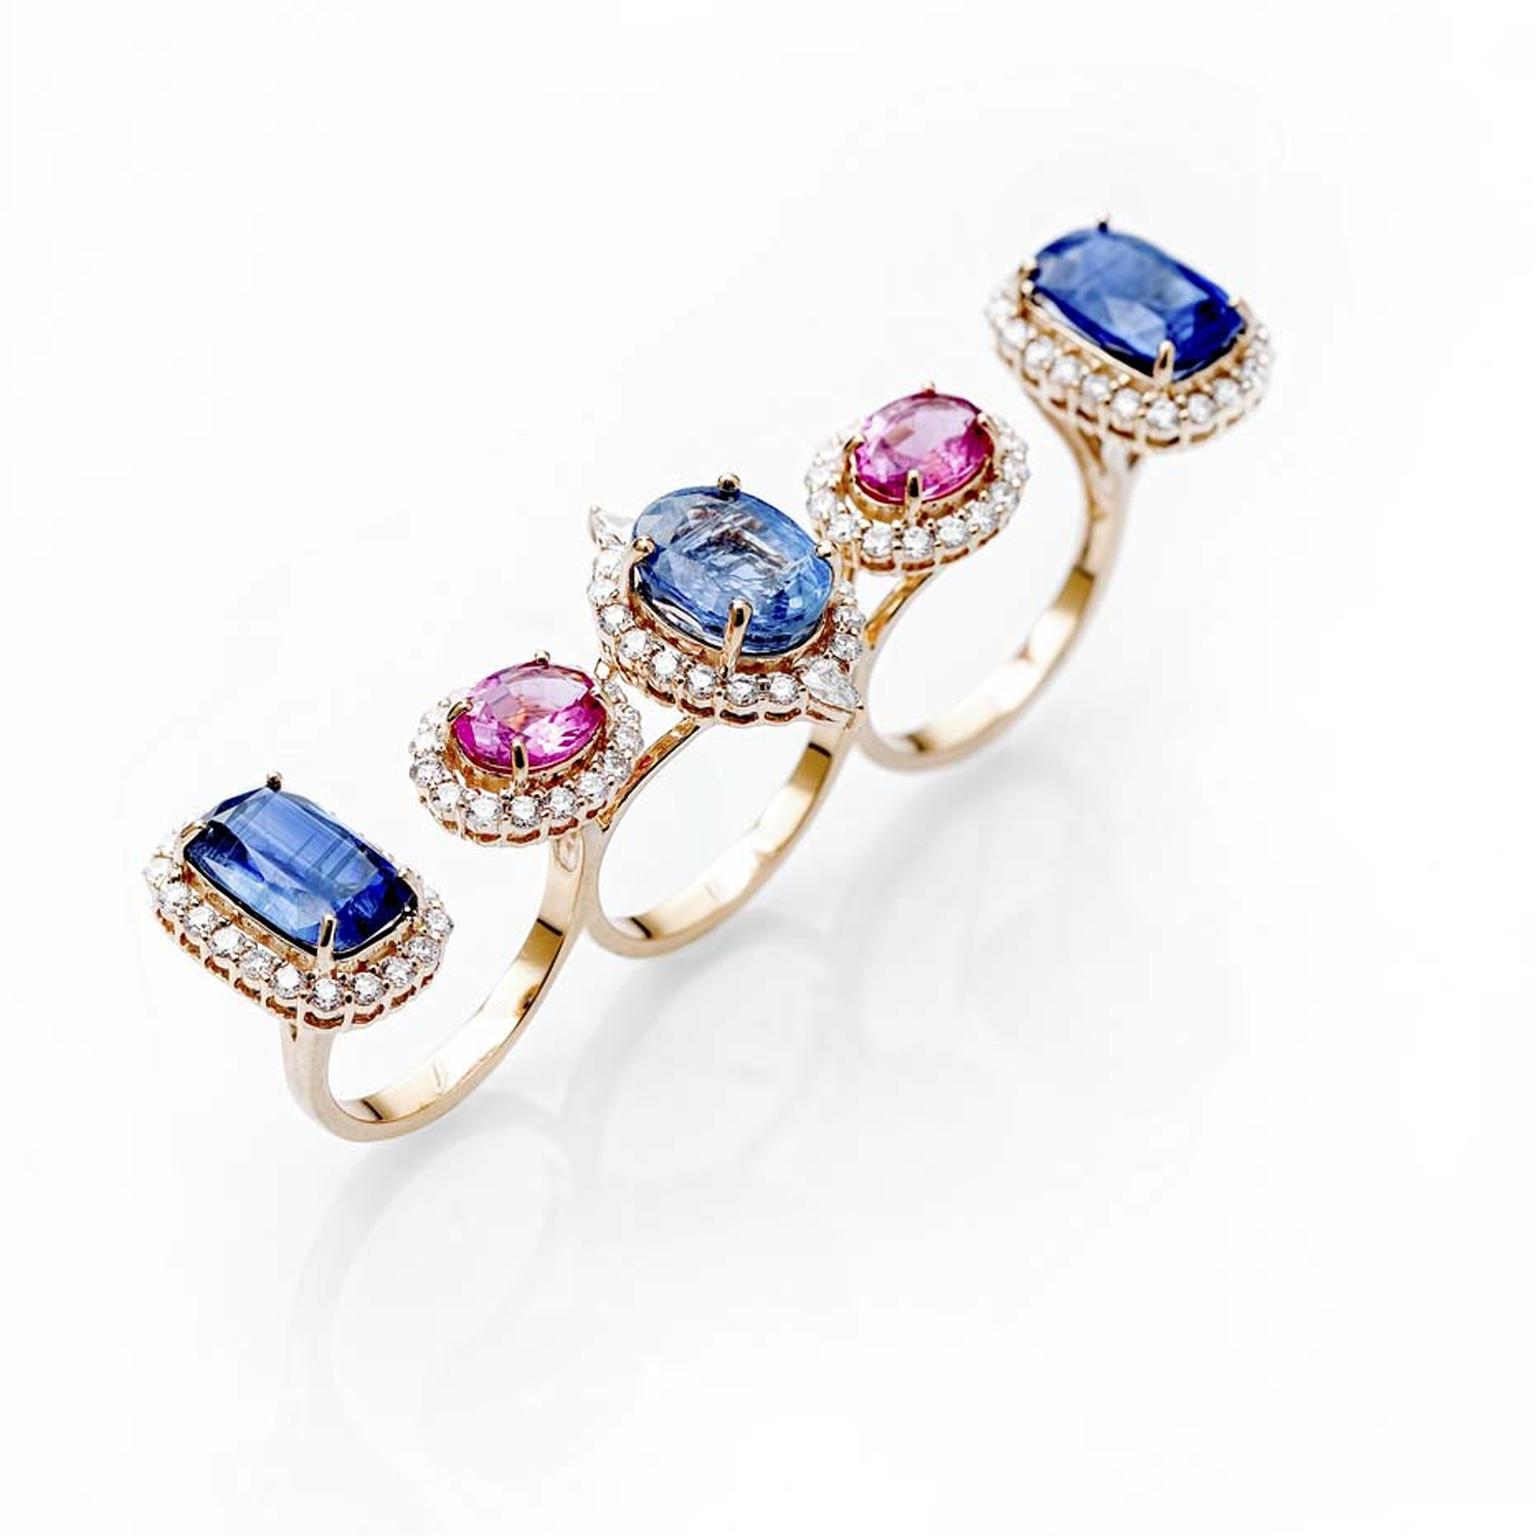 Fahra Khan_Le Jardin Exotique_A multi-finger kyanite, rubellite and diamond ring in 18ct yellow gold by Farah Khan jewellery.jpg